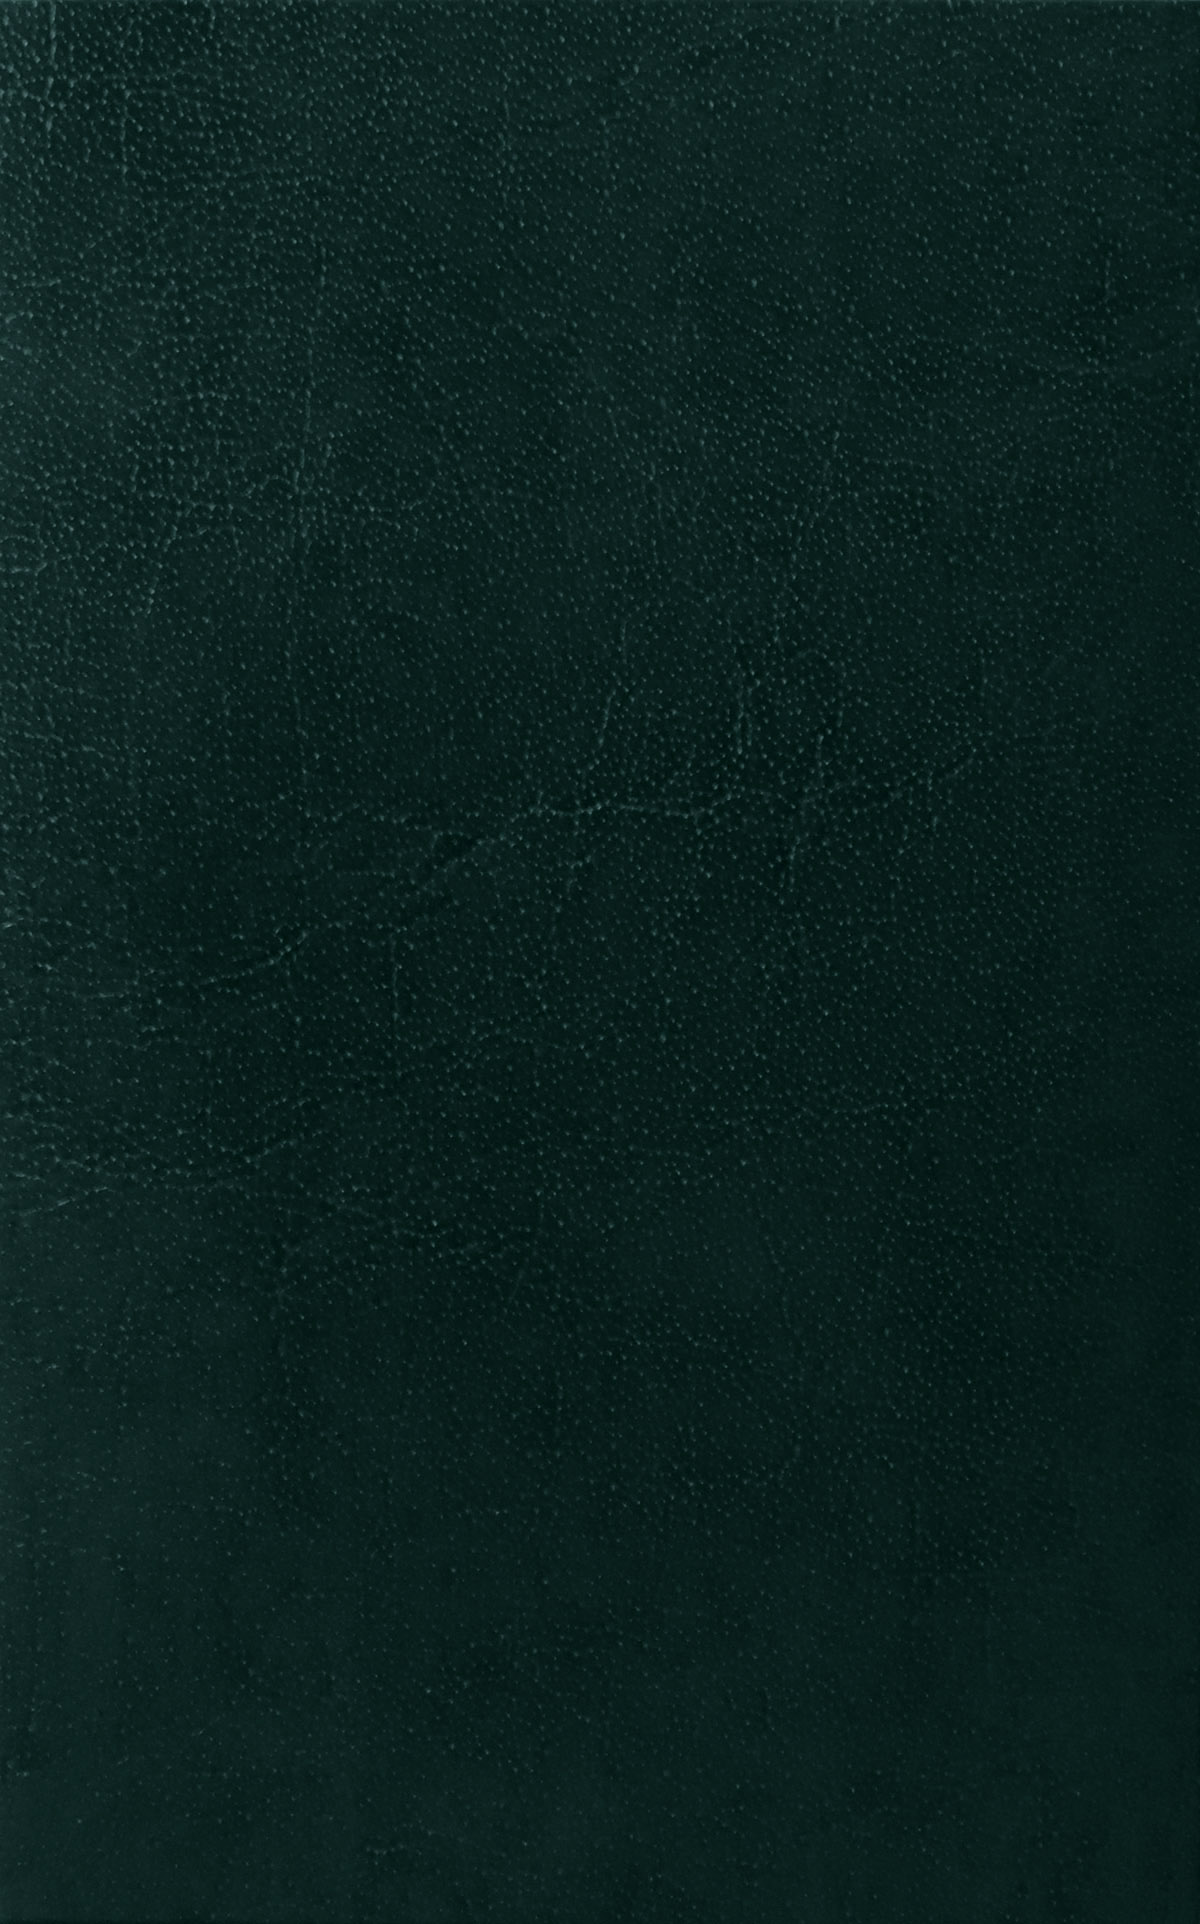 Del Mar bonded leather menu covers Swatch